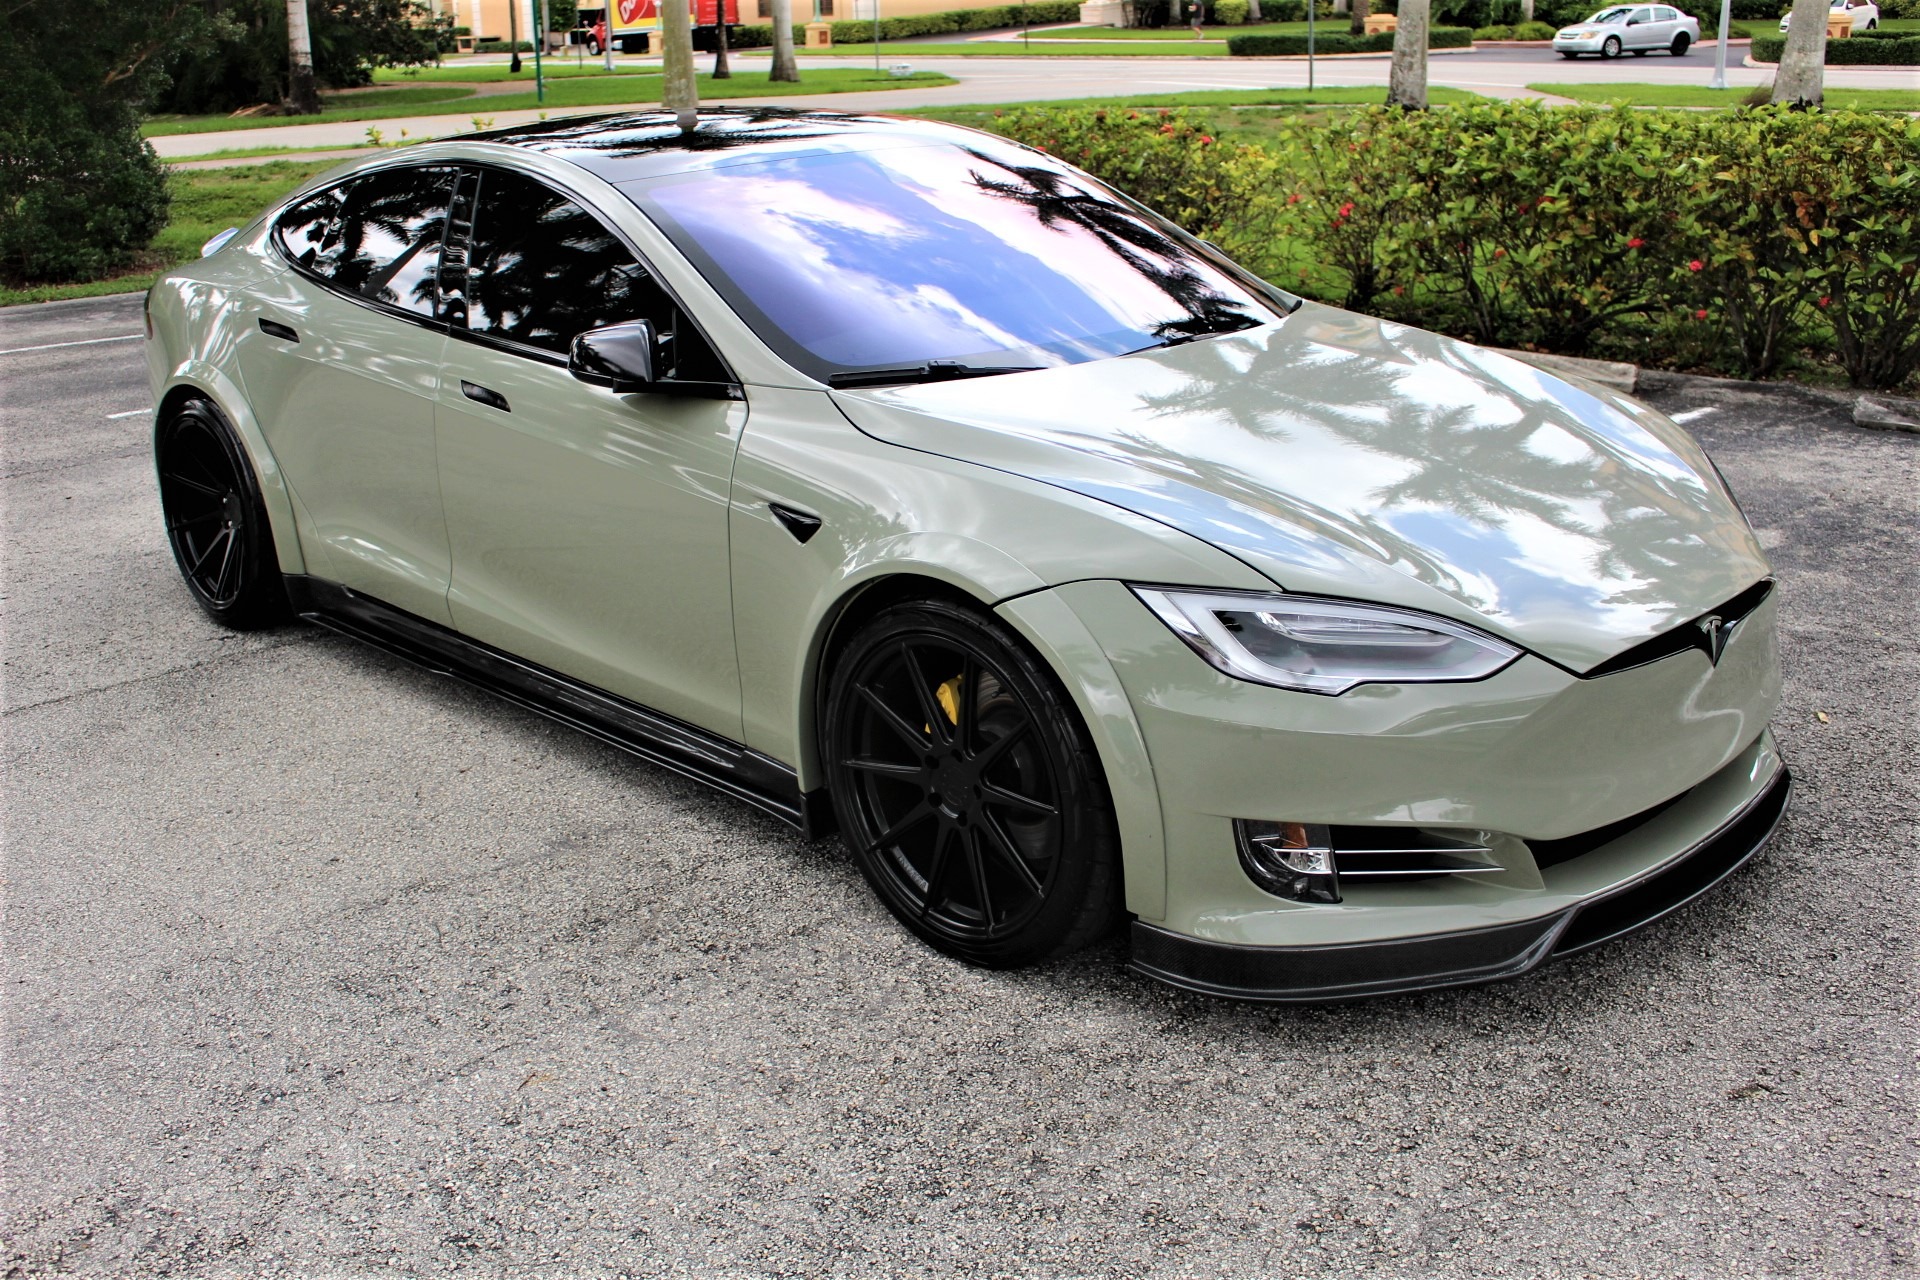 Used 2018 Tesla Model S P100D for sale Sold at The Gables Sports Cars in Miami FL 33146 4